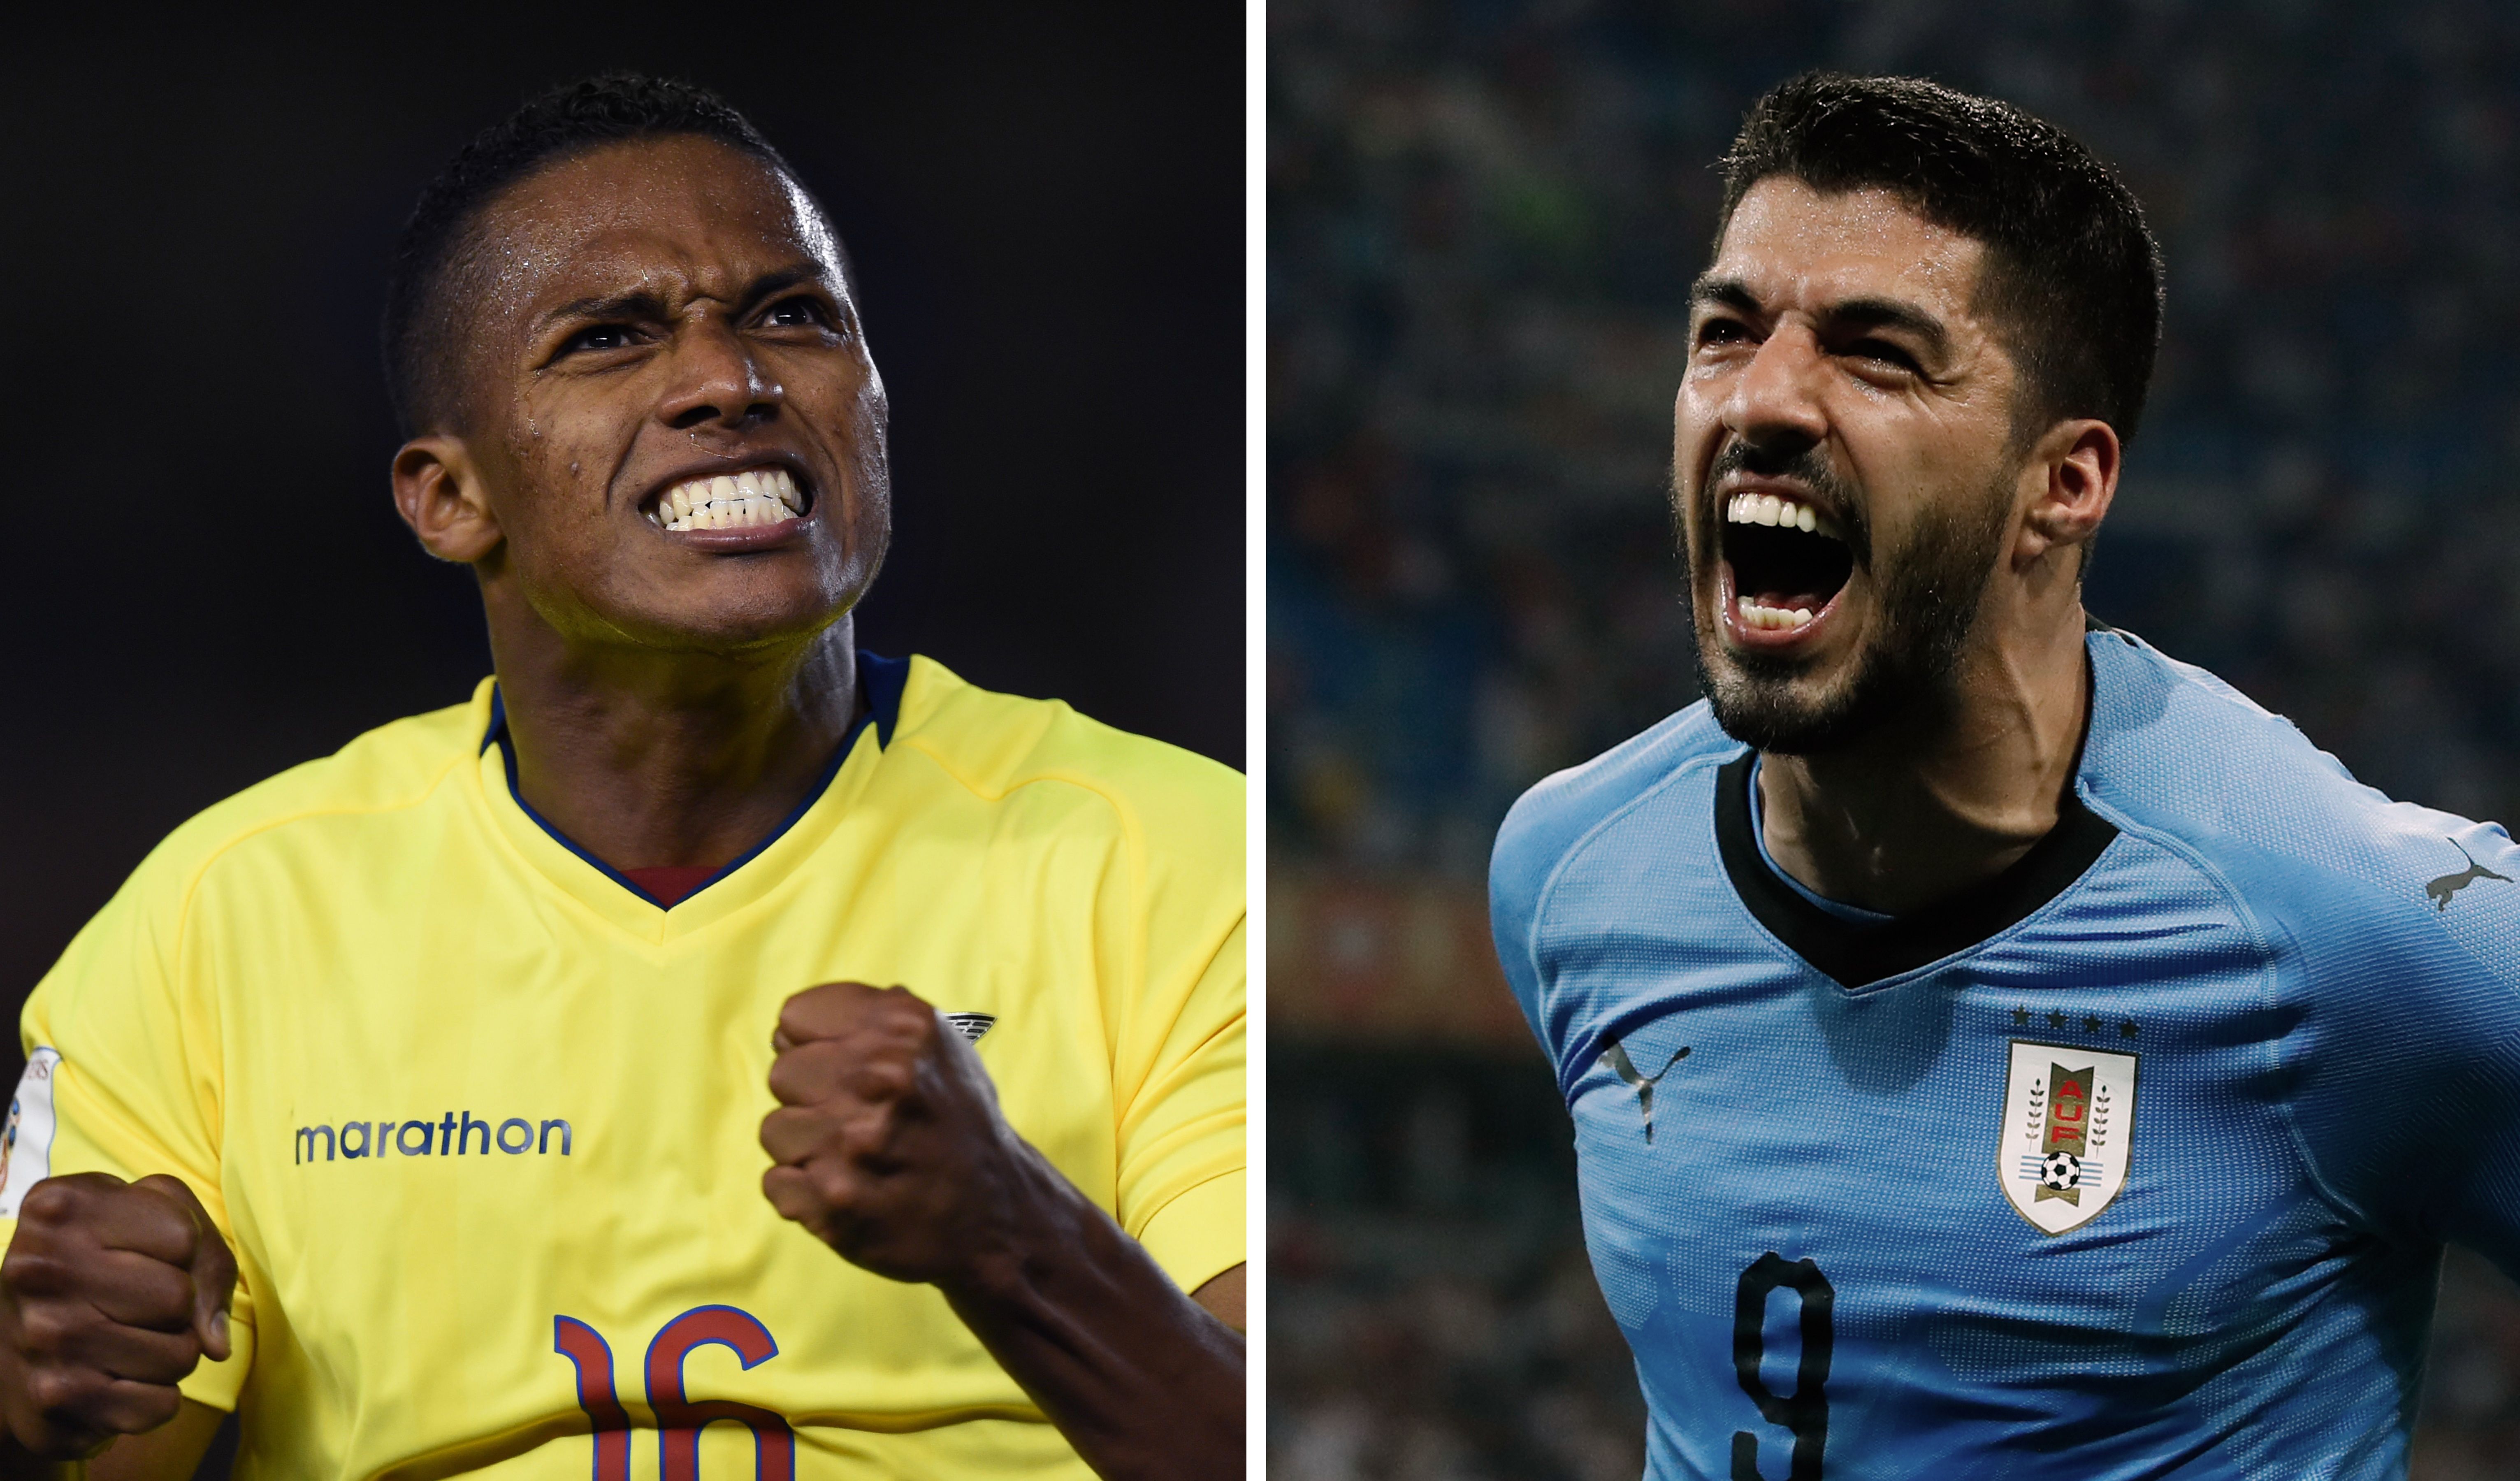 Composition made on June 15, 2019 with file pictures of Ecuador's Antonio Valencia (L) celebrating a goal against Argentina during their Russia 2018 FIFA World Cup qualifier match in Buenos Aires on October 8, 2015 and Uruguay's Luis Suarez celebrating his teams' victory over Portugal during the Russia 2018 World Cup round of 16 match in Sochi on June 30, 2018. - Uruguay and Ecuador will face in a Copa America football tournament group match at the Mineirao Stadium in Belo Horizonte, Brazil, on June 16, 2019 (Photo by Eitan ABRAMOVICH and Odd ANDERSEN / AFP)        (Photo credit should read EITAN ABRAMOVICH,ODD ANDERSEN/AFP/Getty Images)